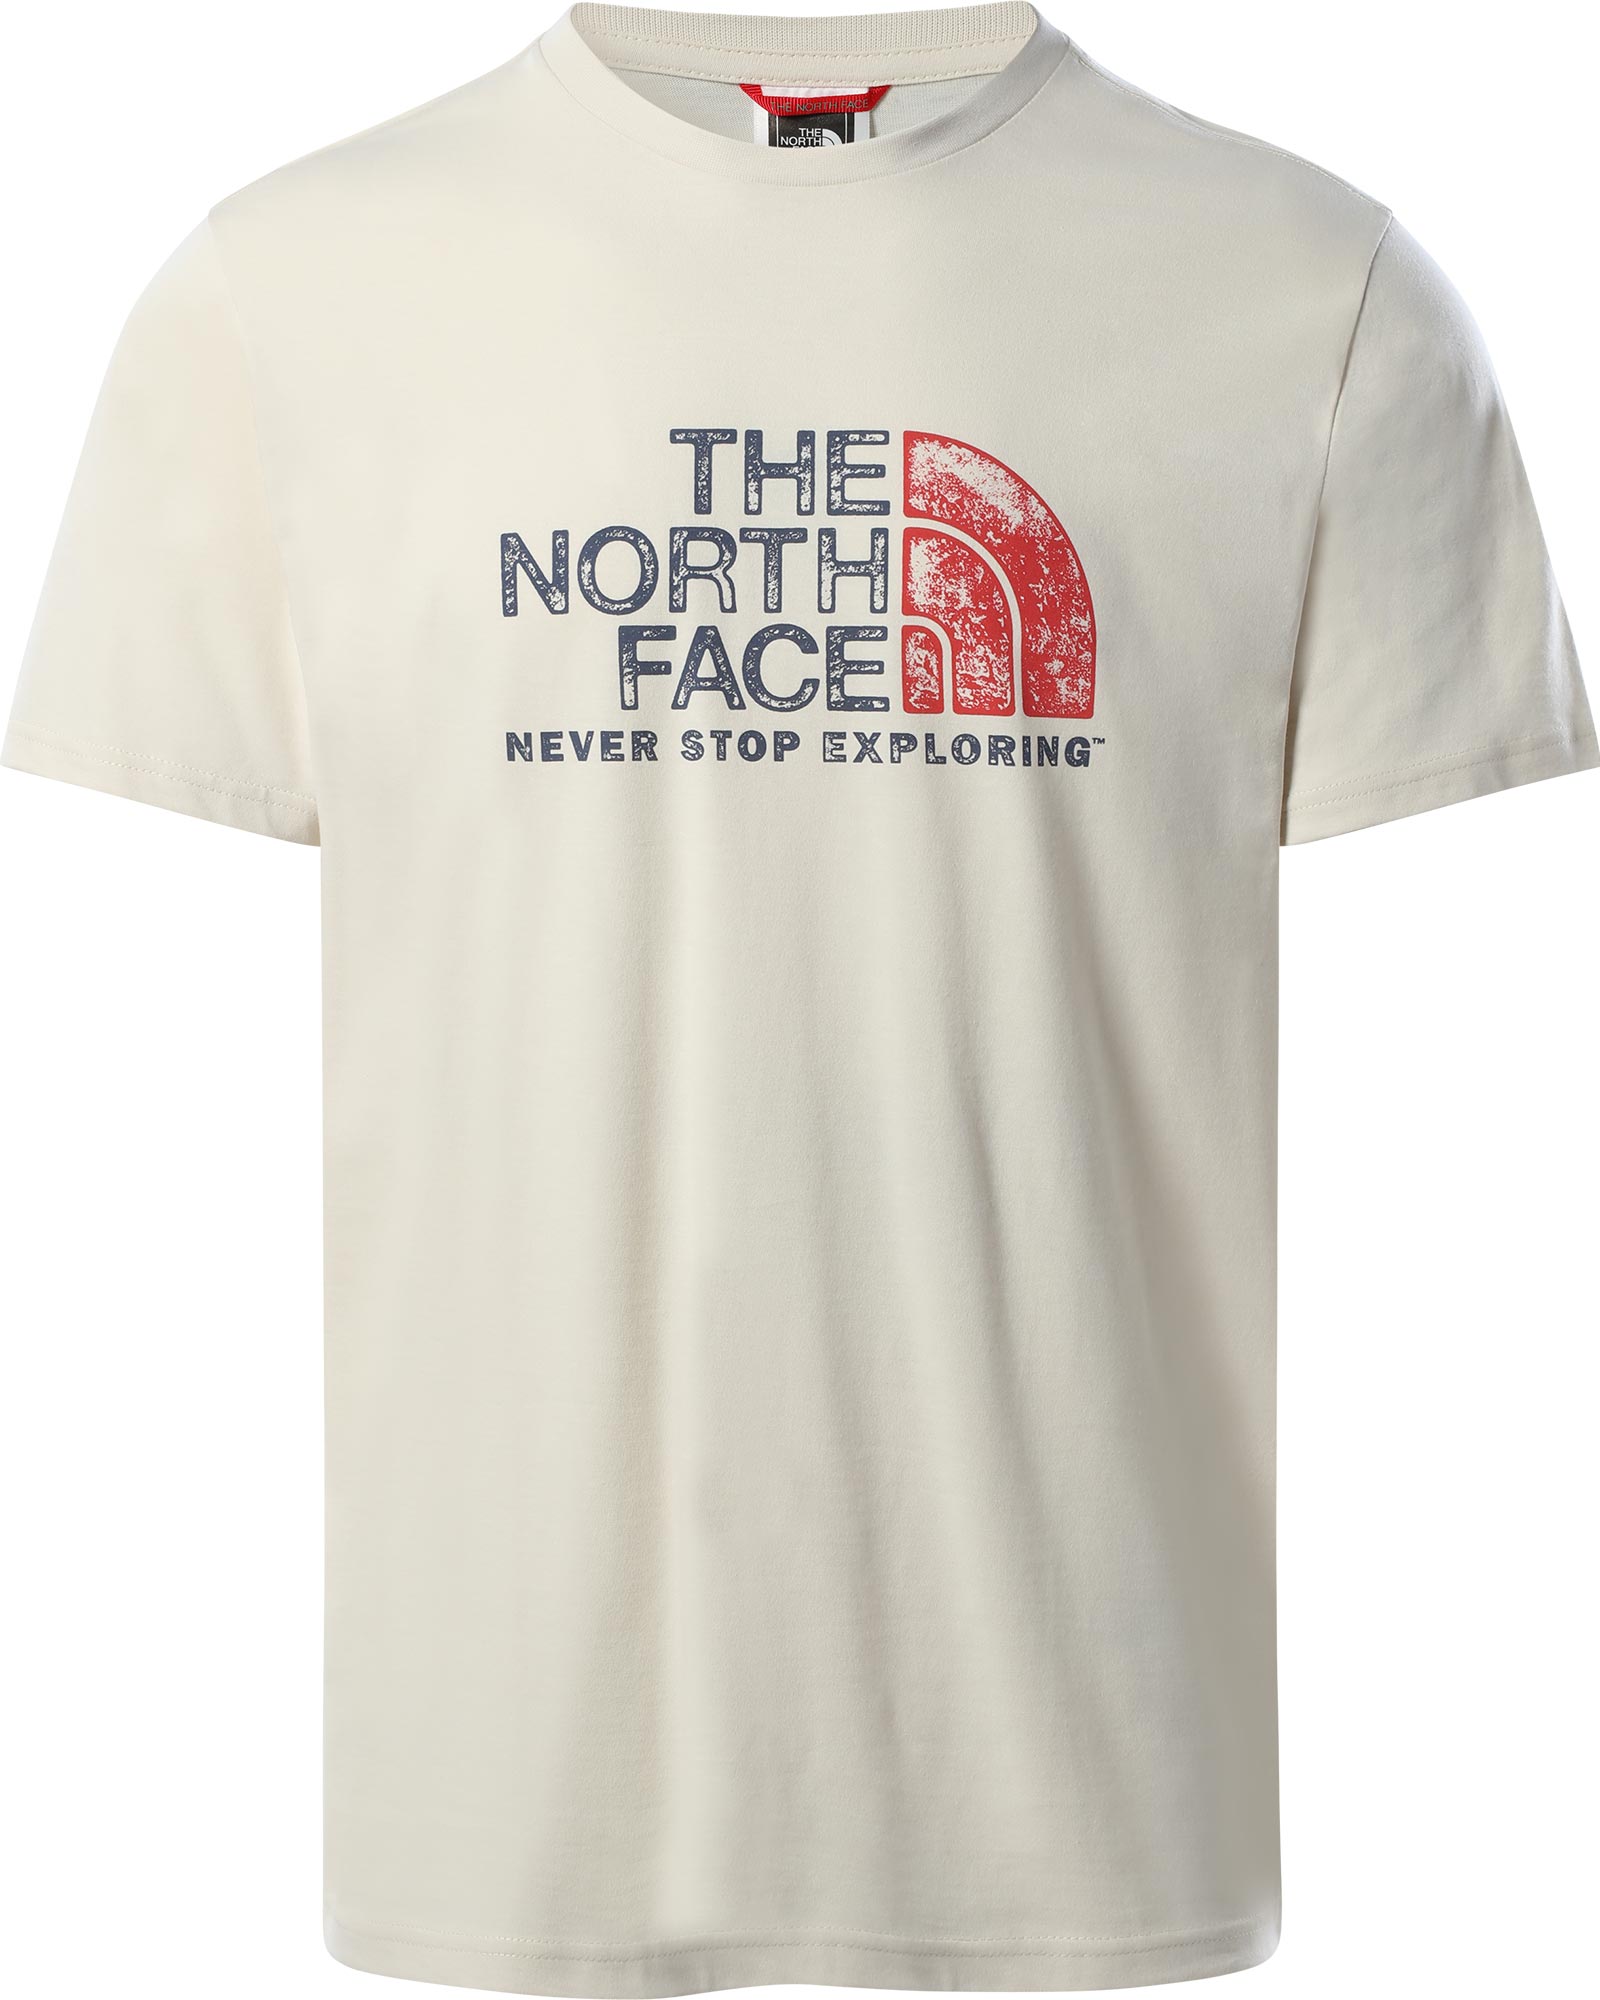 The North Face Rust Men’s T Shirt - Vintage White XS